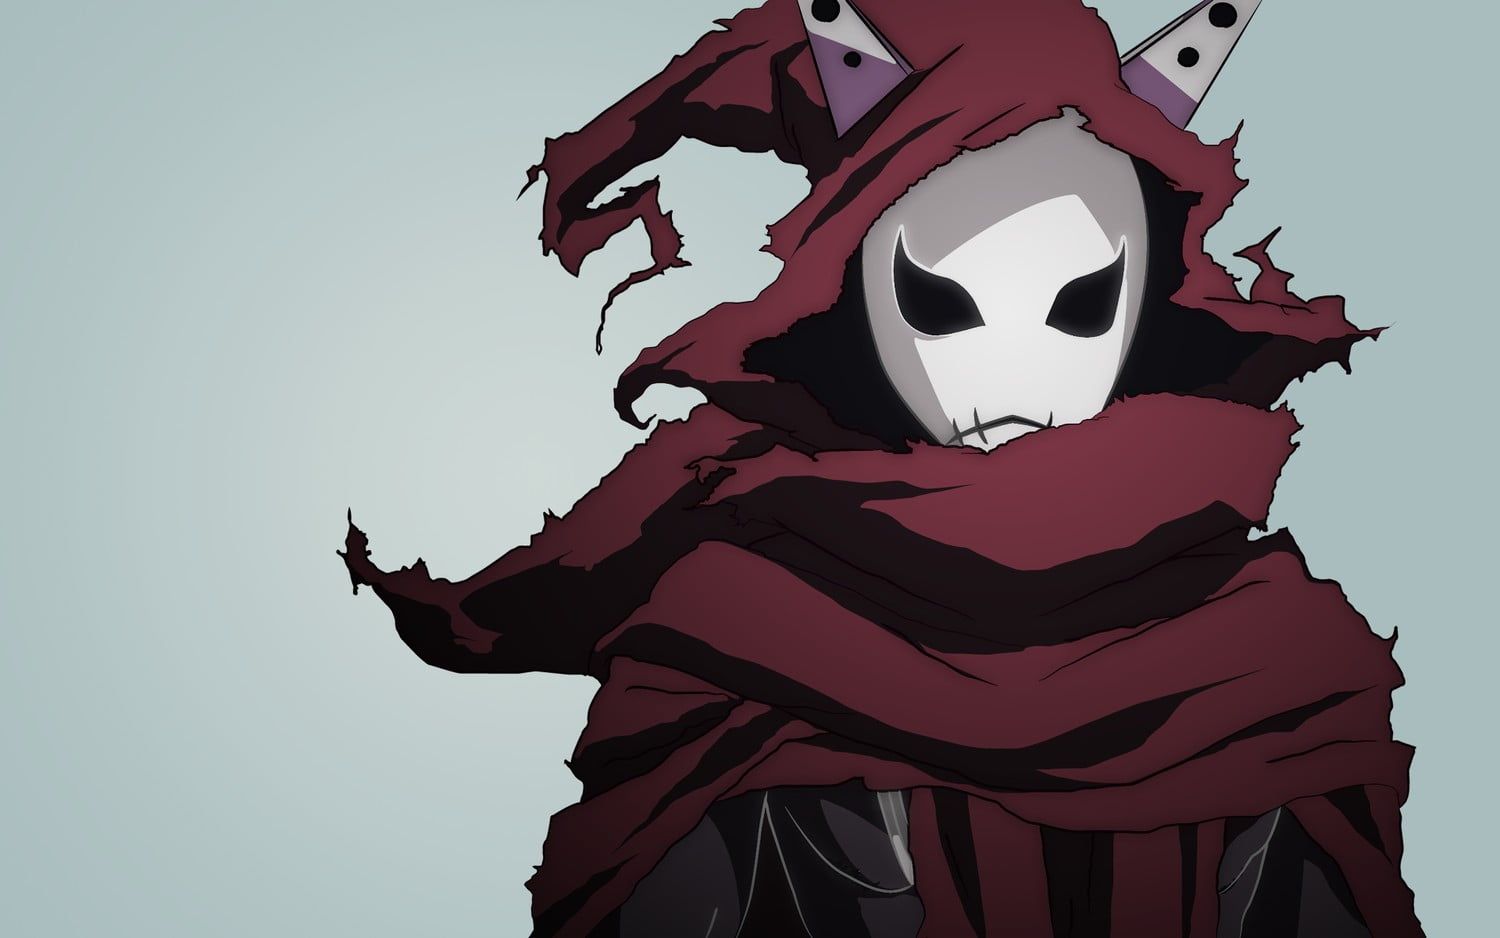 Masked Anime Characters With Cool and Scary Designs